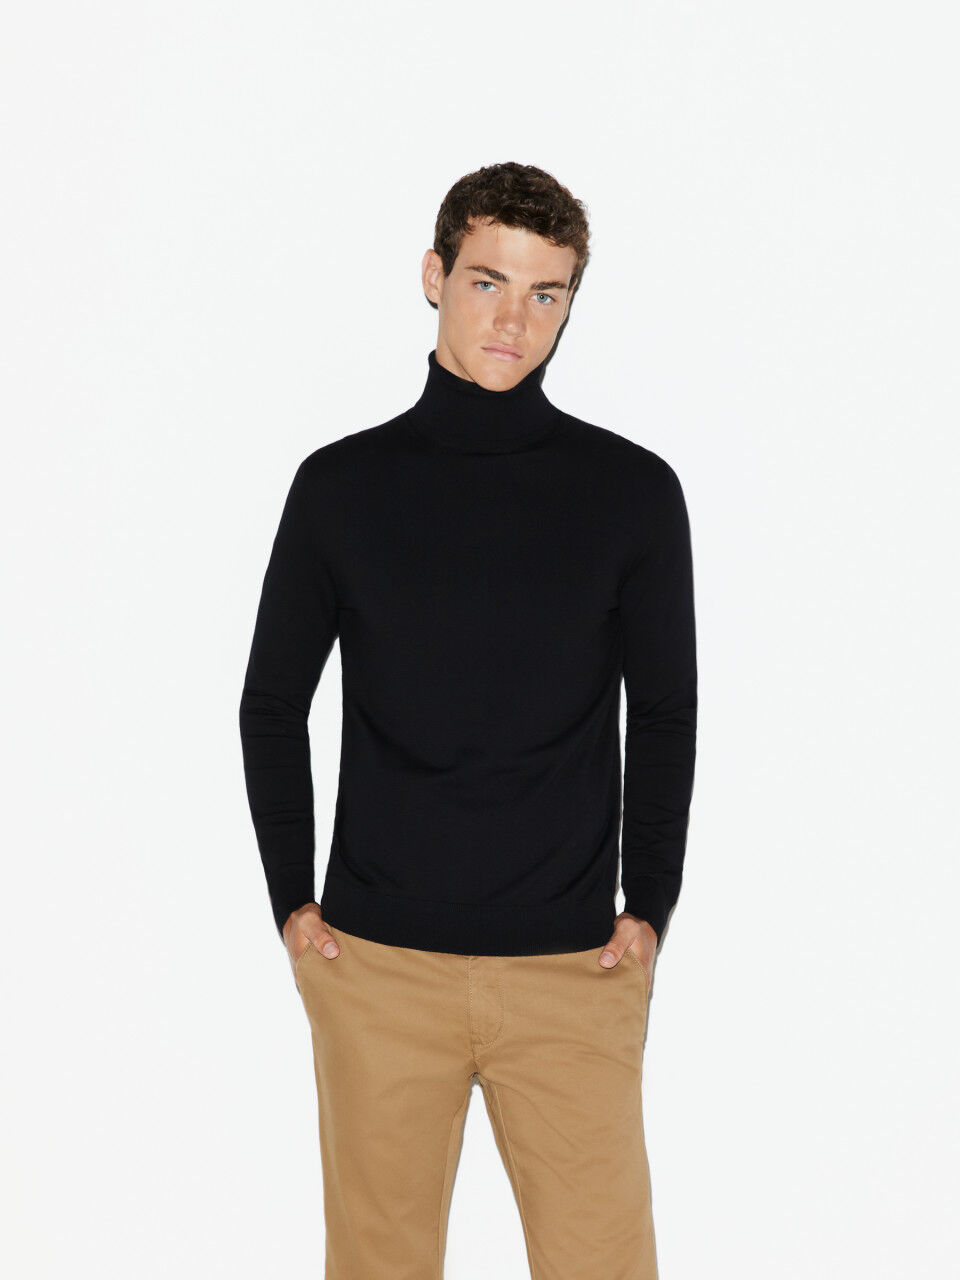 Solid colored sweater with high collar